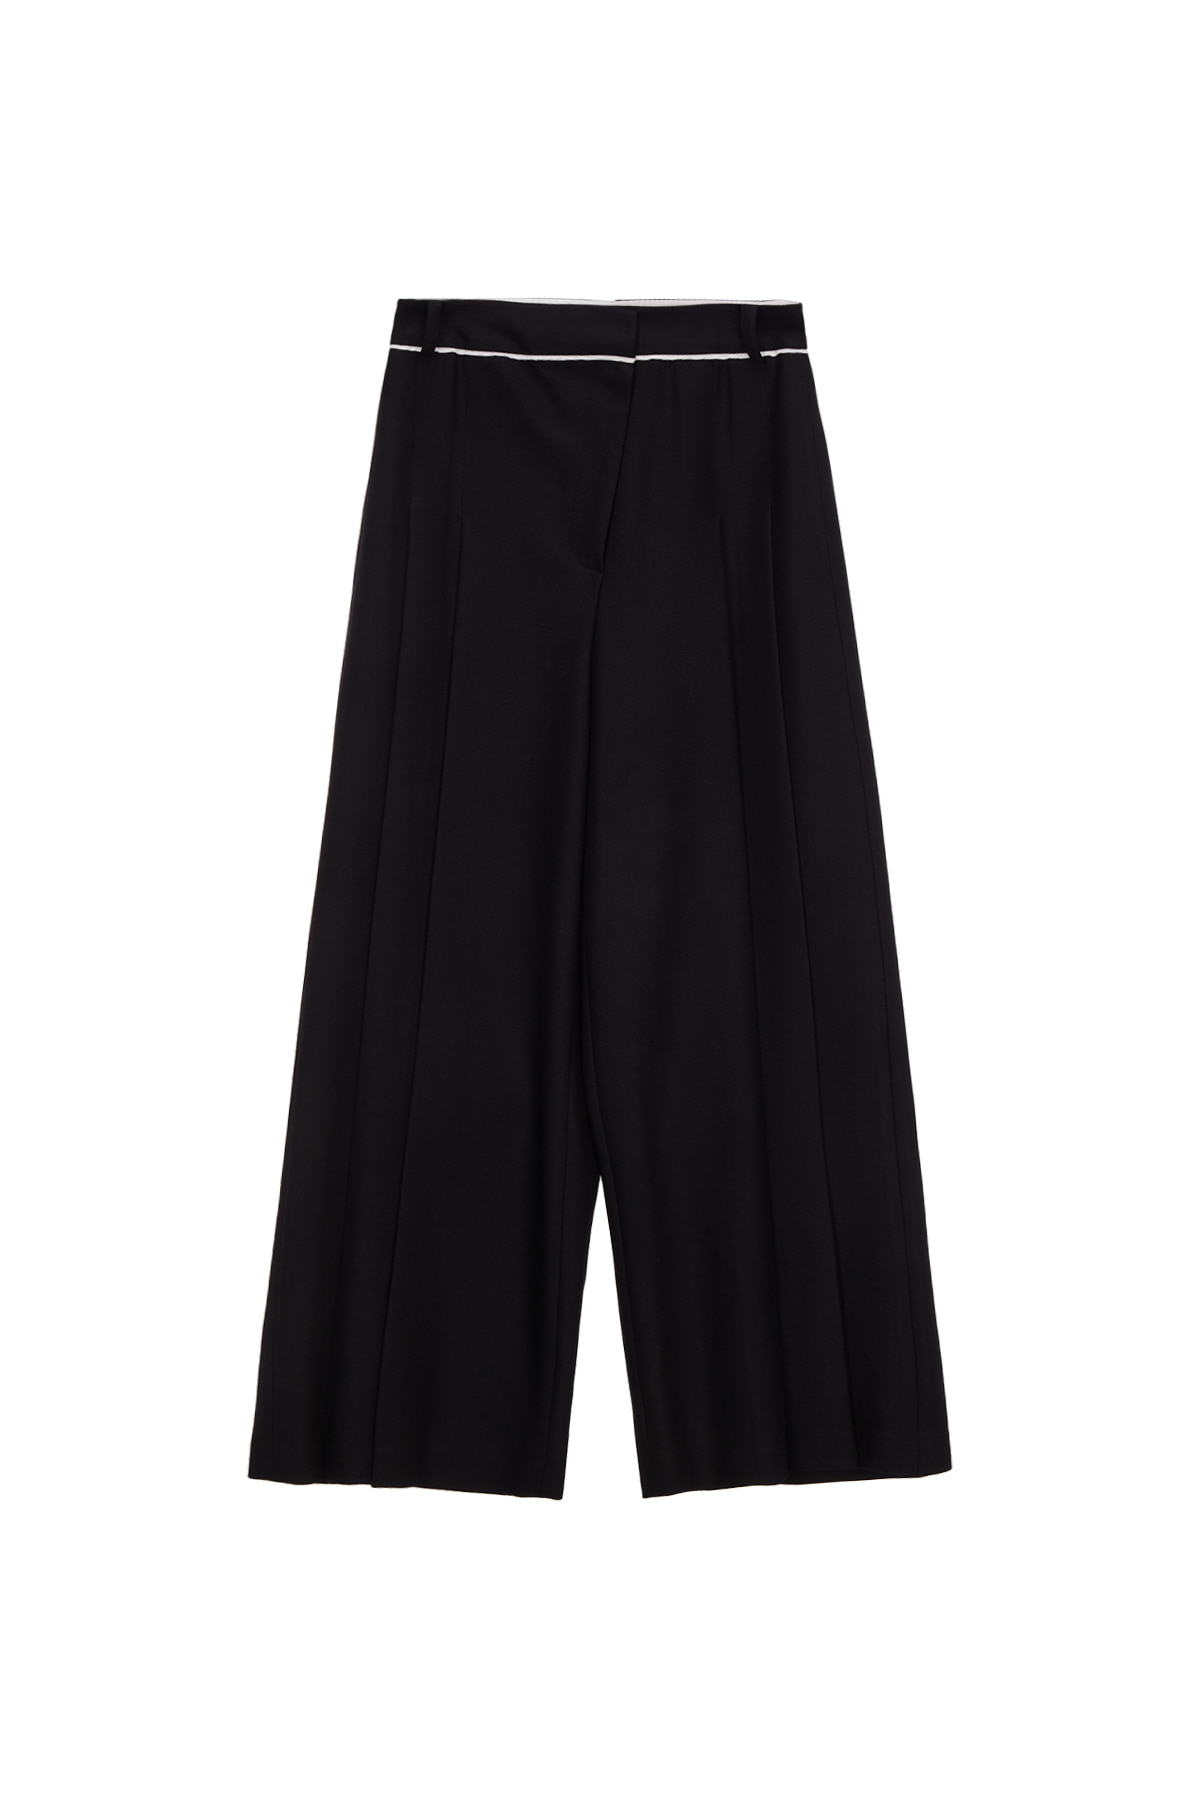 TWO TUCK CURTAIN TROUSER IN BLACK